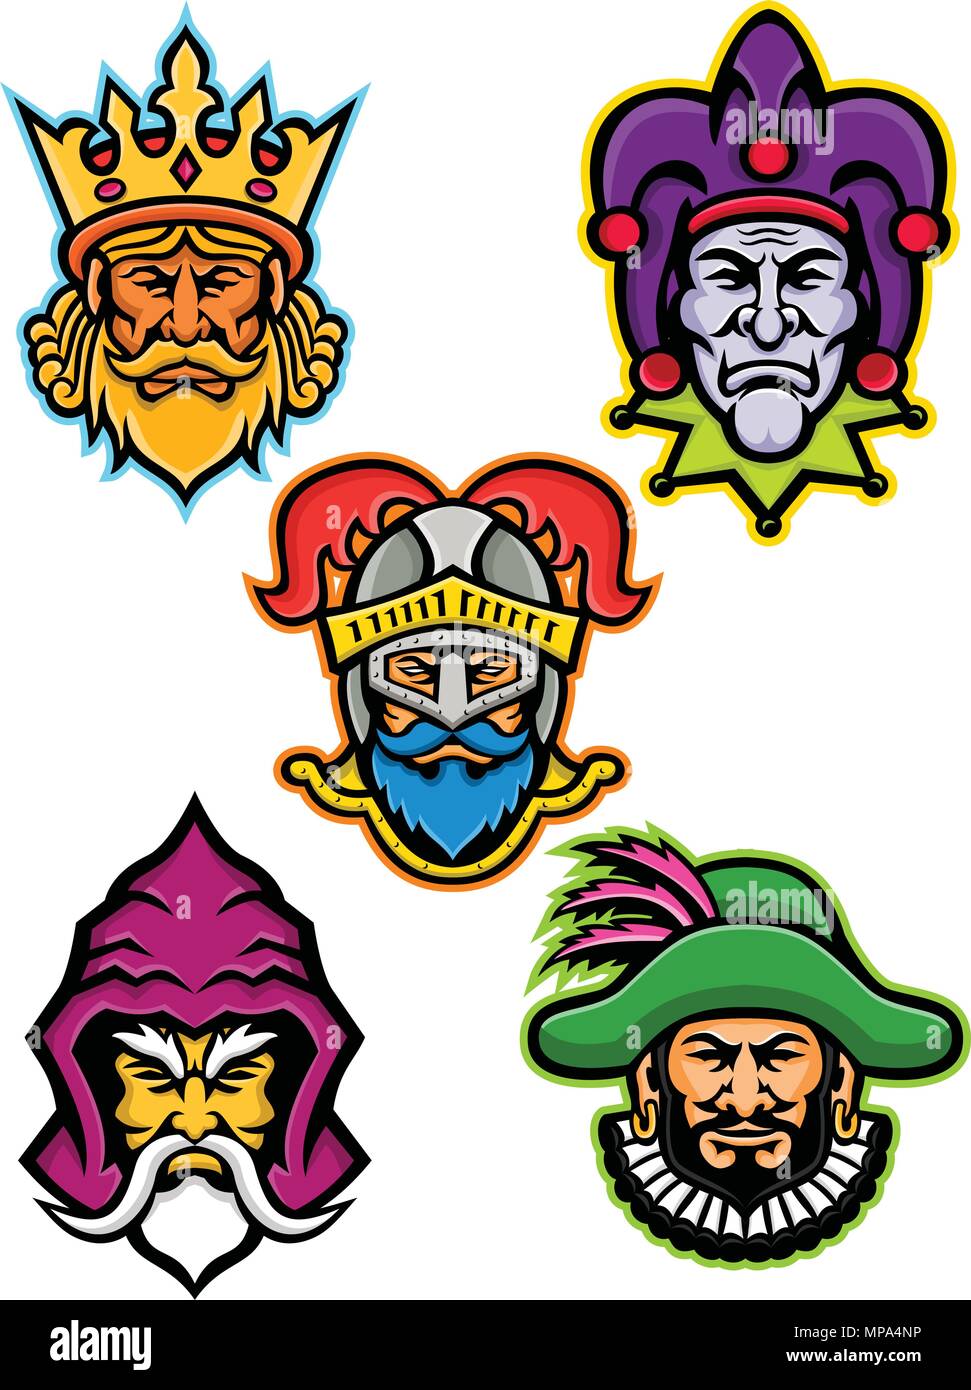 Mascot icon illustration set of heads of the European medieval royal court figures like the king or monarch, court jester or fool, knight, wizard or s Stock Vector